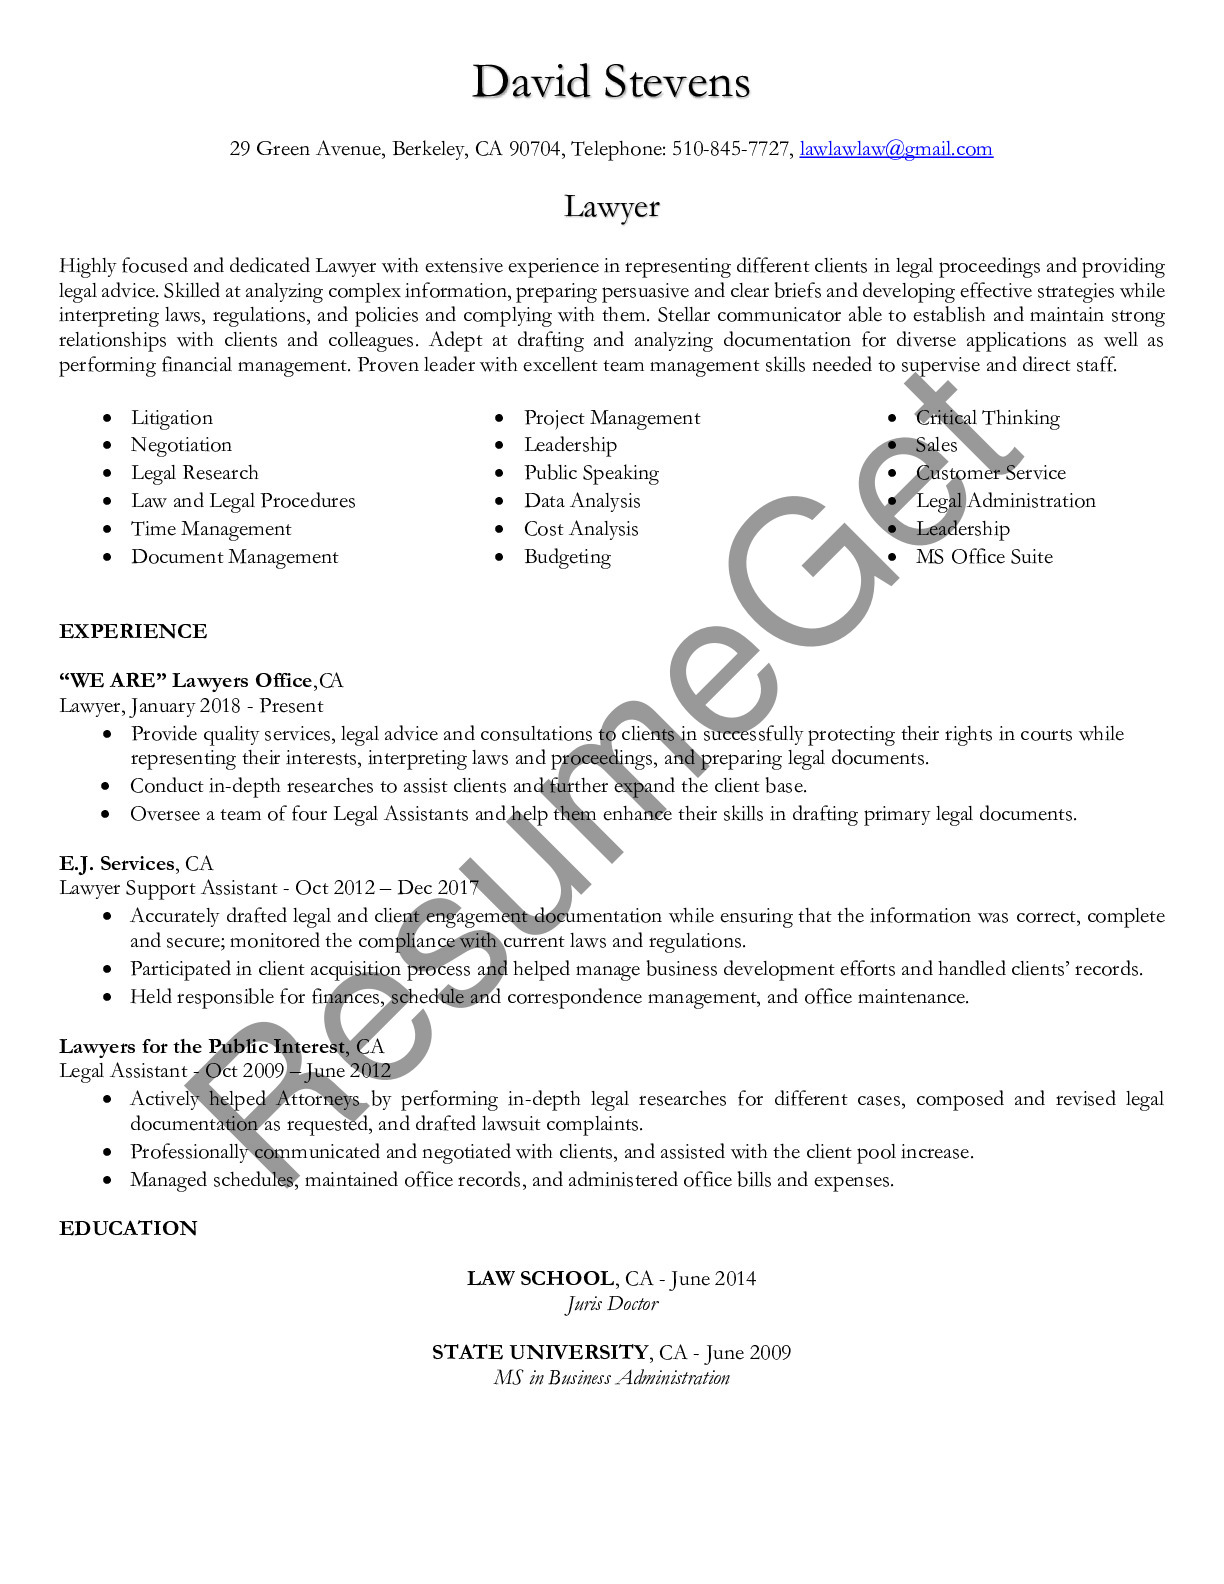 Resume Example for Lawyer